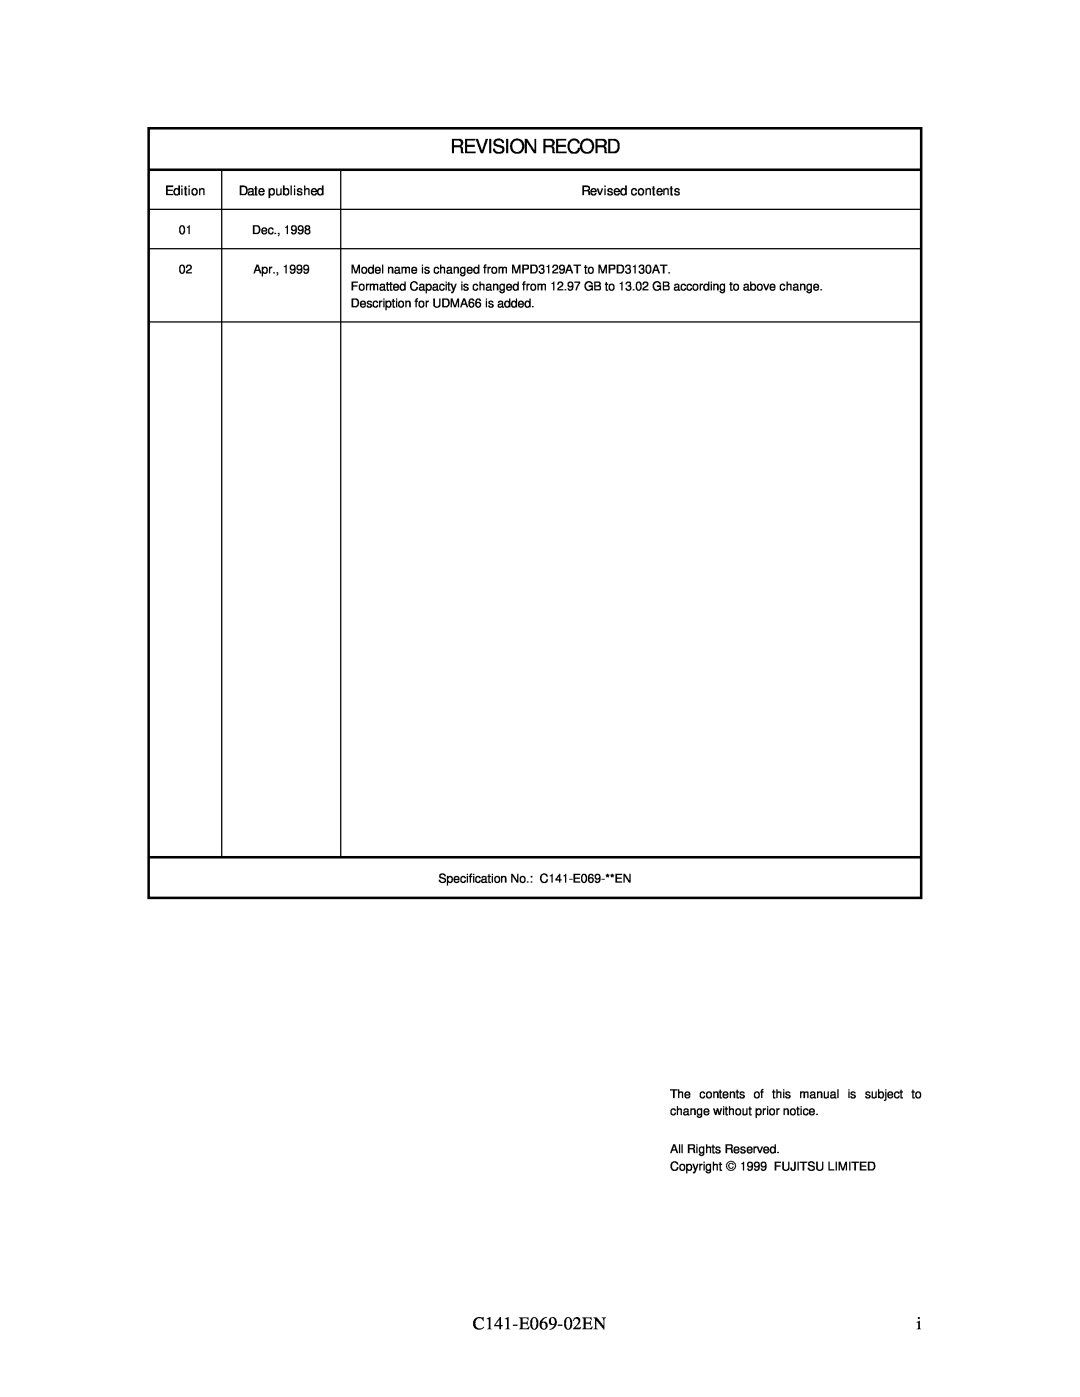 Fujitsu MPD3XXXAT Revision Record, Revised contents, The contents of this manual is subject to, Edition, Date published 